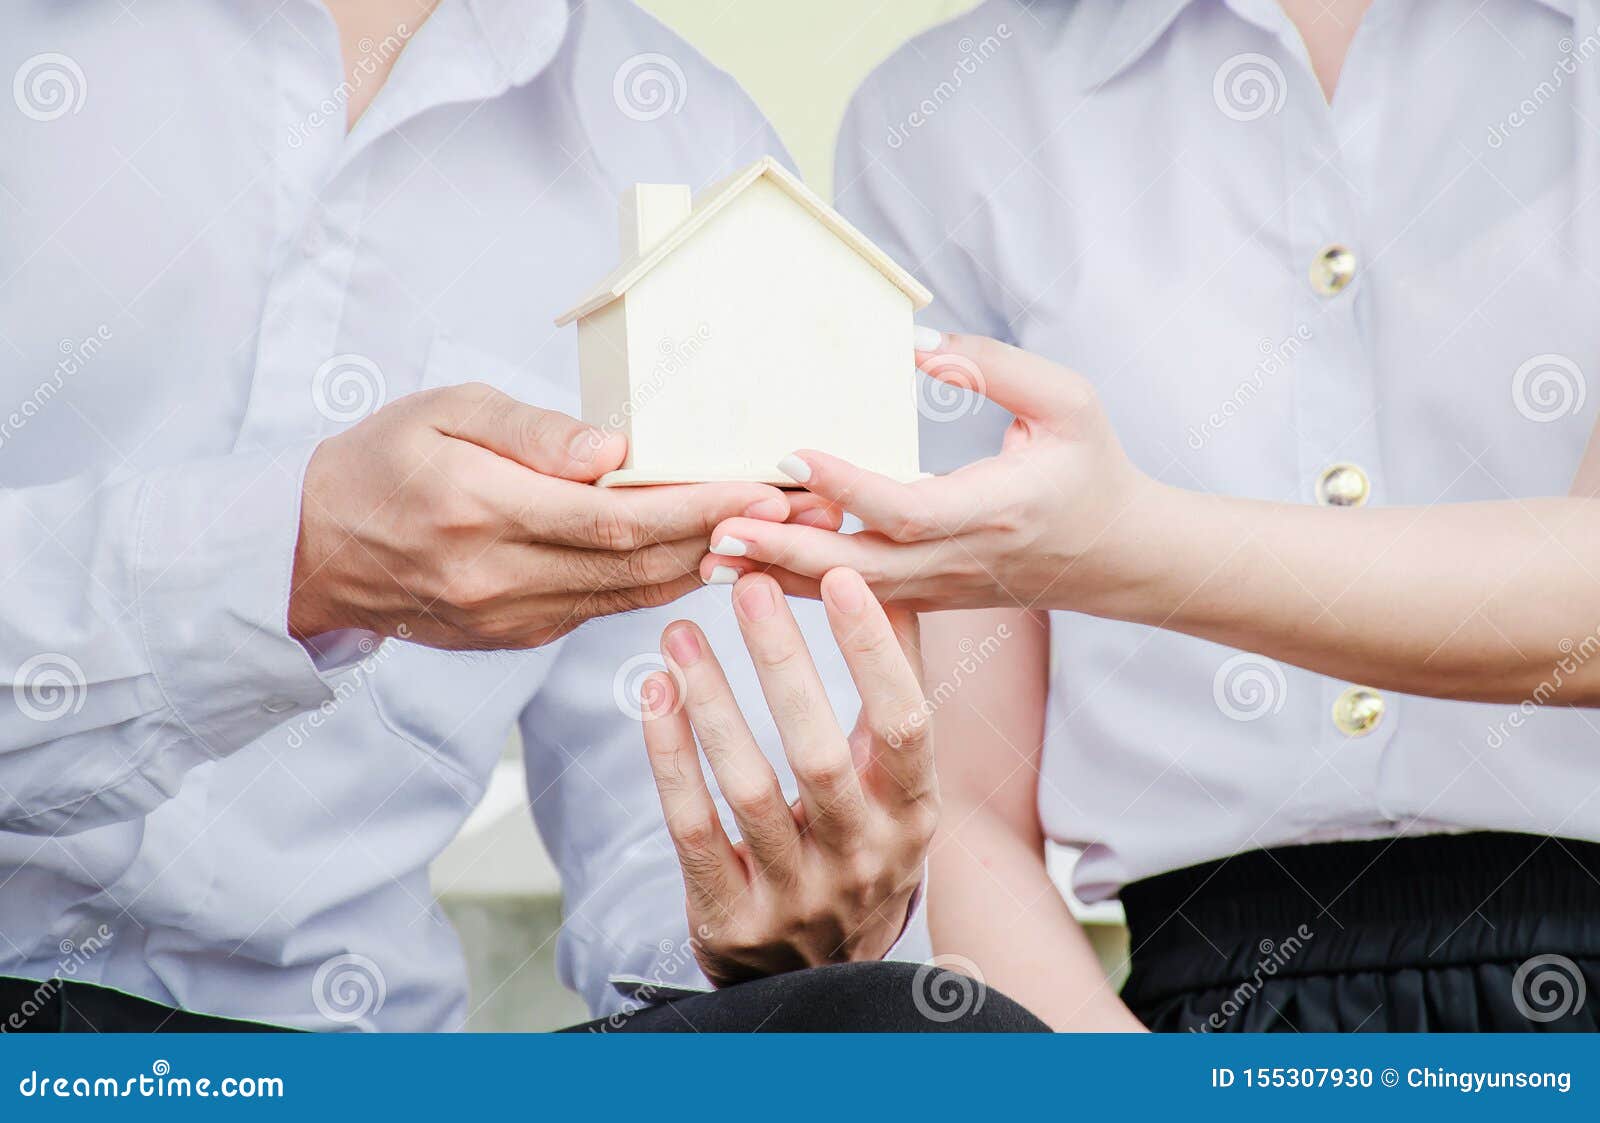 closeup hands of an couple students holding a little house together, concept of sustaining a house between two people.